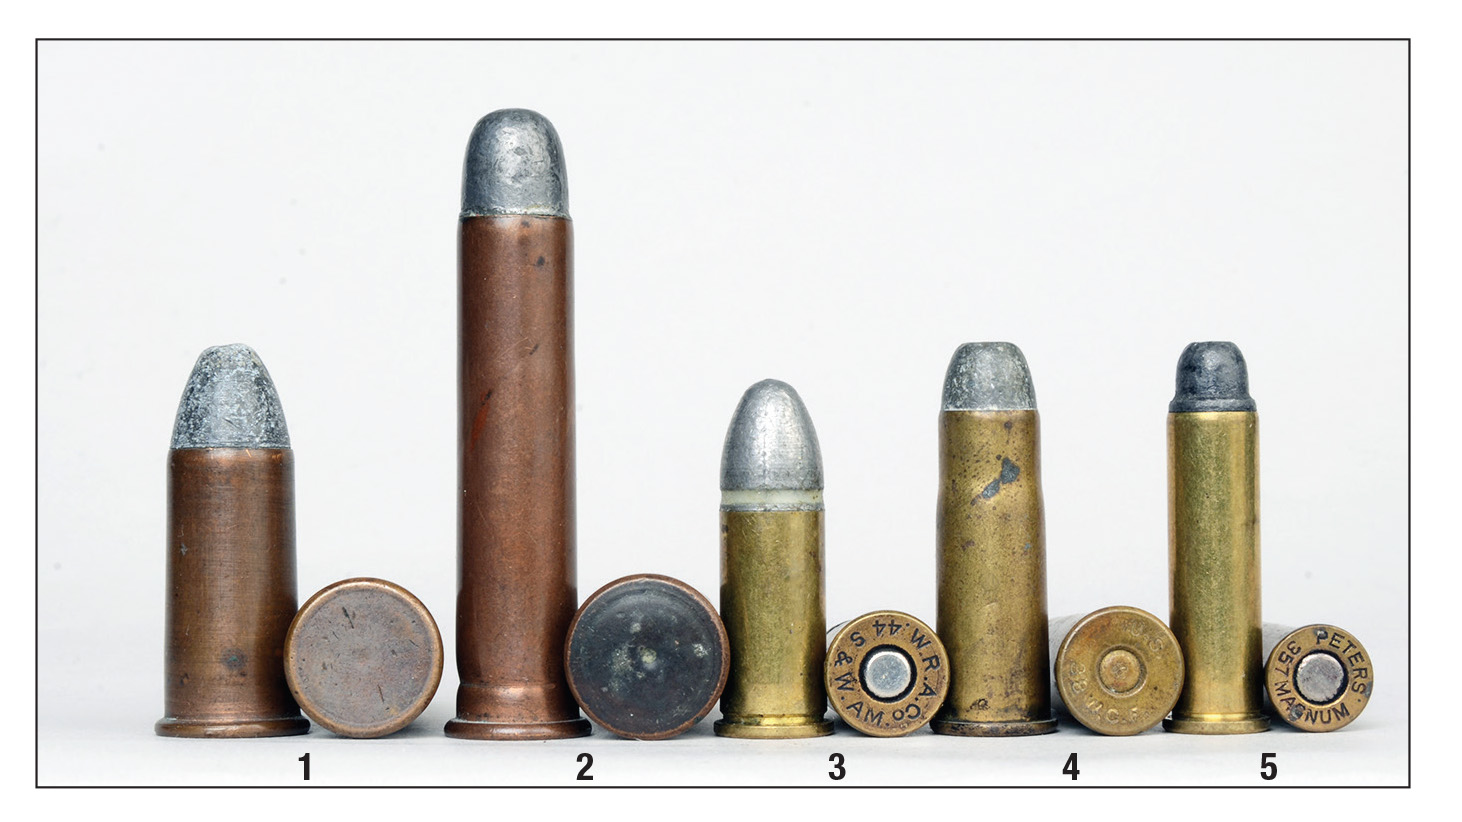 A variety of primers have been used through the years: (1) Rimfire .56-50 Spencer, (2) internal primed .45 Government, (3) the first reloadable revolver cartridge .44 Smith & Wesson American, (4) small primer in .38 WCF (.38-40) and (5) large pistol primer in .357 Smith & Wesson Magnum.